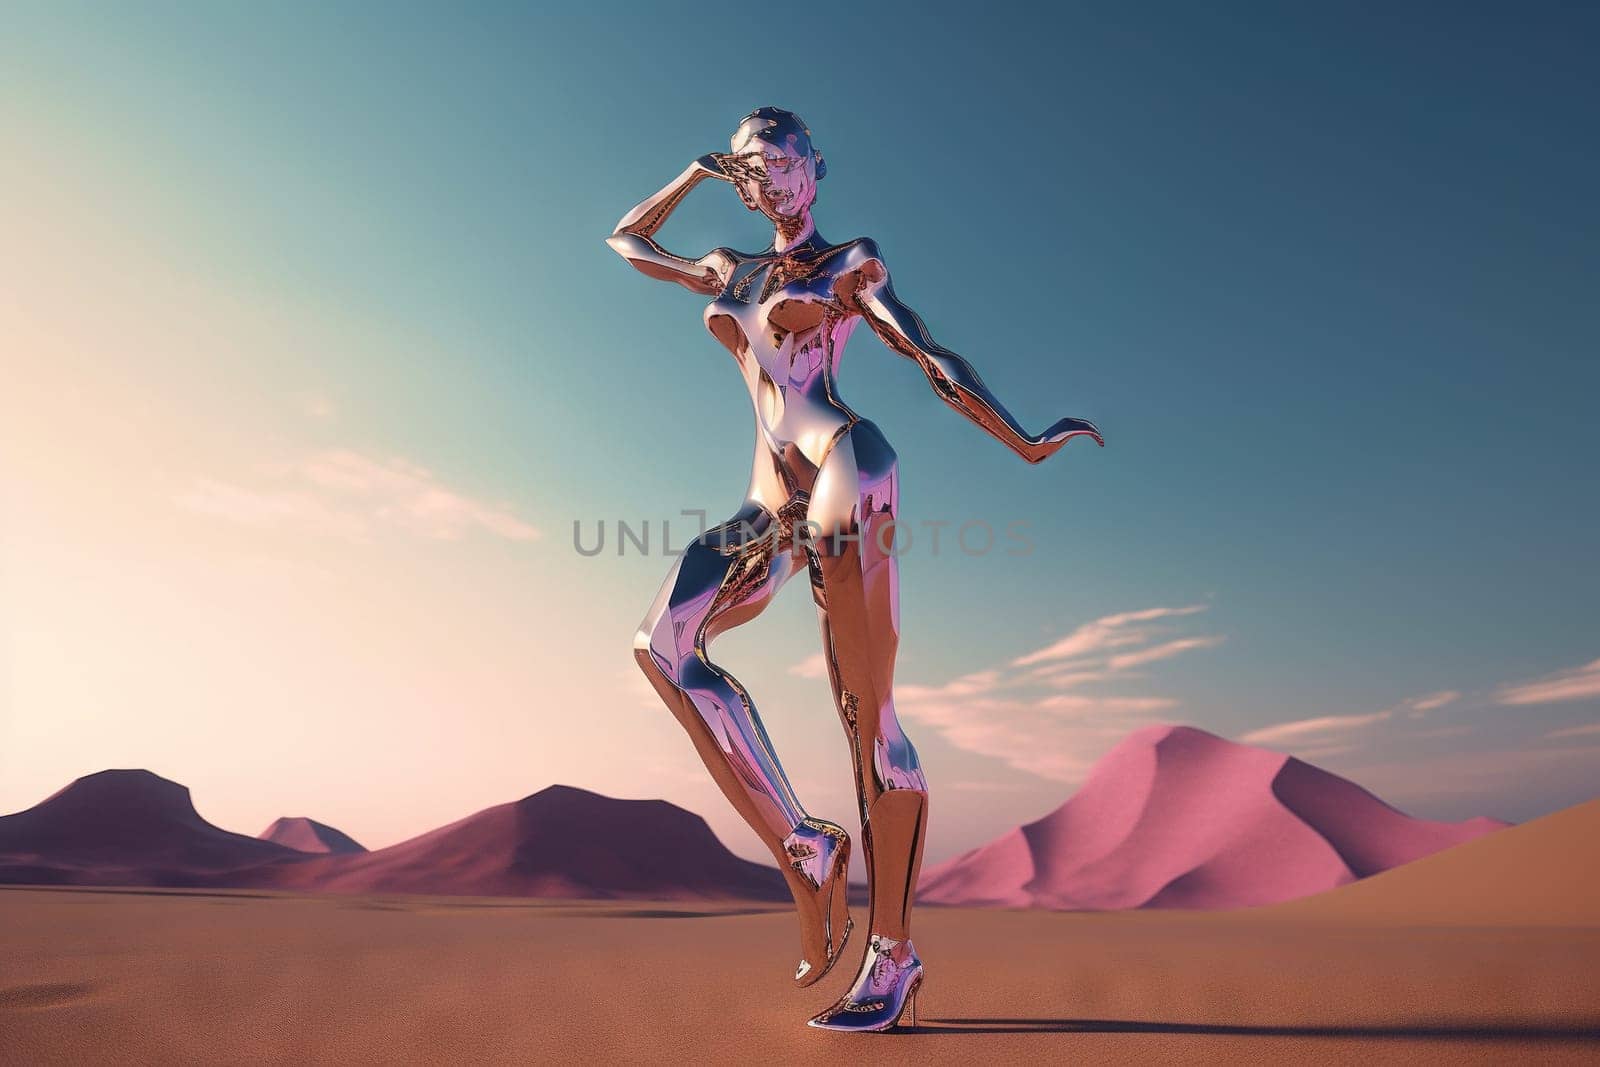 Crome robot woman dancing in the desert. Artificial intelligence rise and shiny. Mechanical beauty. Generated AI